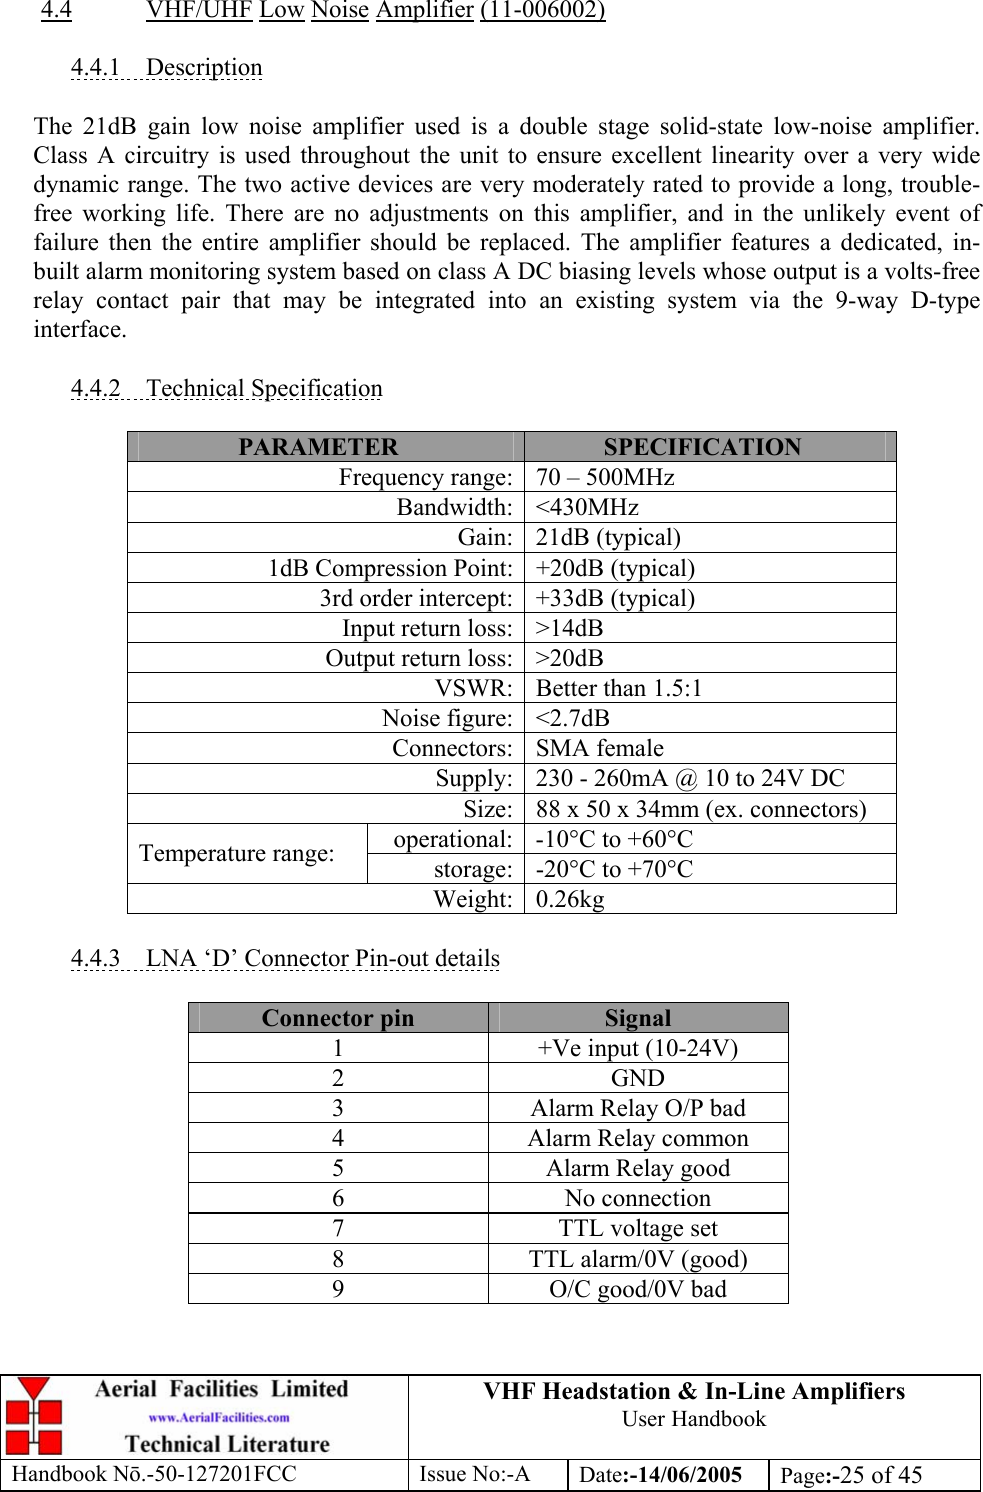 VHF Headstation &amp; In-Line Amplifiers User Handbook Handbook Nō.-50-127201FCC Issue No:-A Date:-14/06/2005  Page:-25 of 45   4.4 VHF/UHF Low Noise Amplifier (11-006002)  4.4.1 Description  The 21dB gain low noise amplifier used is a double stage solid-state low-noise amplifier. Class A circuitry is used throughout the unit to ensure excellent linearity over a very wide dynamic range. The two active devices are very moderately rated to provide a long, trouble-free working life. There are no adjustments on this amplifier, and in the unlikely event of failure then the entire amplifier should be replaced. The amplifier features a dedicated, in-built alarm monitoring system based on class A DC biasing levels whose output is a volts-free relay contact pair that may be integrated into an existing system via the 9-way D-type interface.  4.4.2 Technical Specification  PARAMETER  SPECIFICATION Frequency range: 70 – 500MHz Bandwidth: &lt;430MHz Gain: 21dB (typical) 1dB Compression Point: +20dB (typical) 3rd order intercept: +33dB (typical) Input return loss: &gt;14dB Output return loss: &gt;20dB VSWR: Better than 1.5:1 Noise figure: &lt;2.7dB Connectors: SMA female Supply: 230 - 260mA @ 10 to 24V DC Size: 88 x 50 x 34mm (ex. connectors) operational: -10°C to +60°C Temperature range:  storage: -20°C to +70°C Weight: 0.26kg  4.4.3  LNA ‘D’ Connector Pin-out details  Connector pin  Signal 1  +Ve input (10-24V) 2 GND 3  Alarm Relay O/P bad 4  Alarm Relay common 5  Alarm Relay good 6 No connection 7  TTL voltage set 8  TTL alarm/0V (good) 9  O/C good/0V bad  